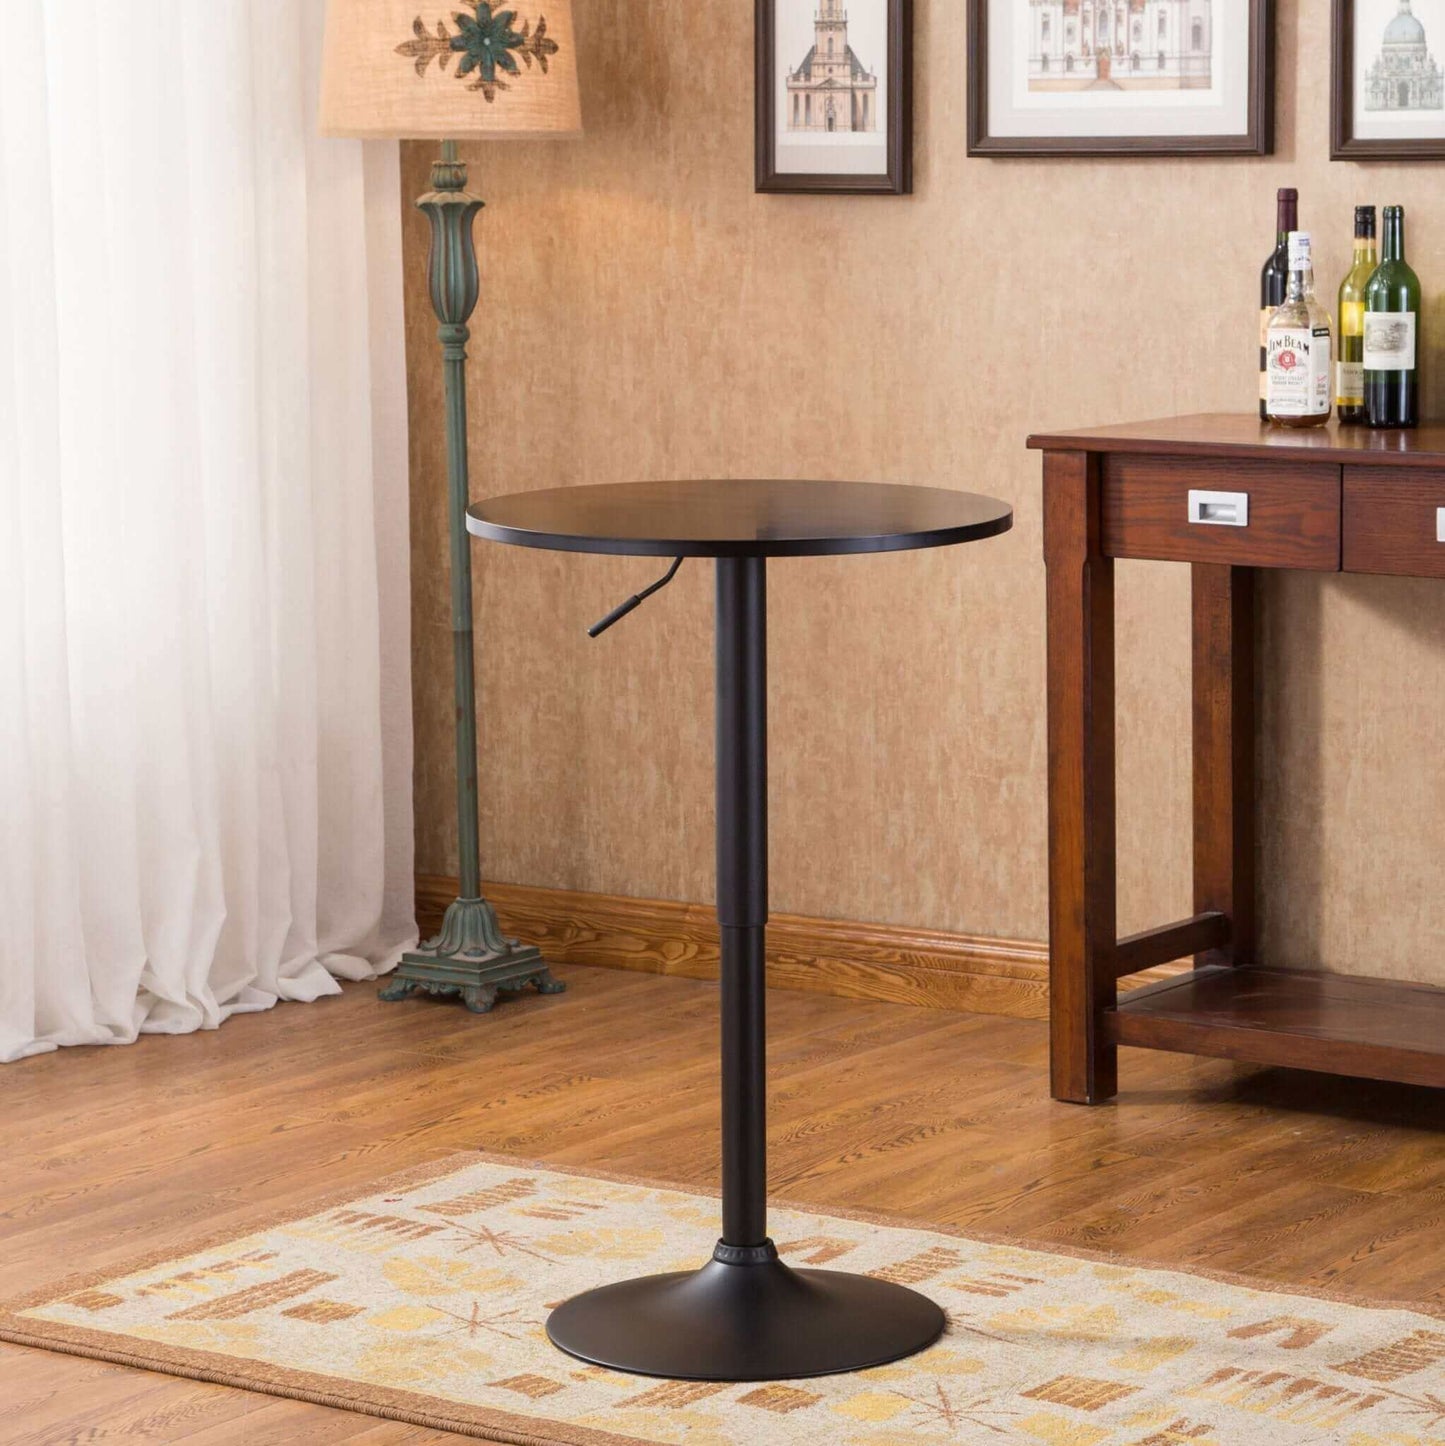 Adjustable height black bar table in a stylish dining room setting